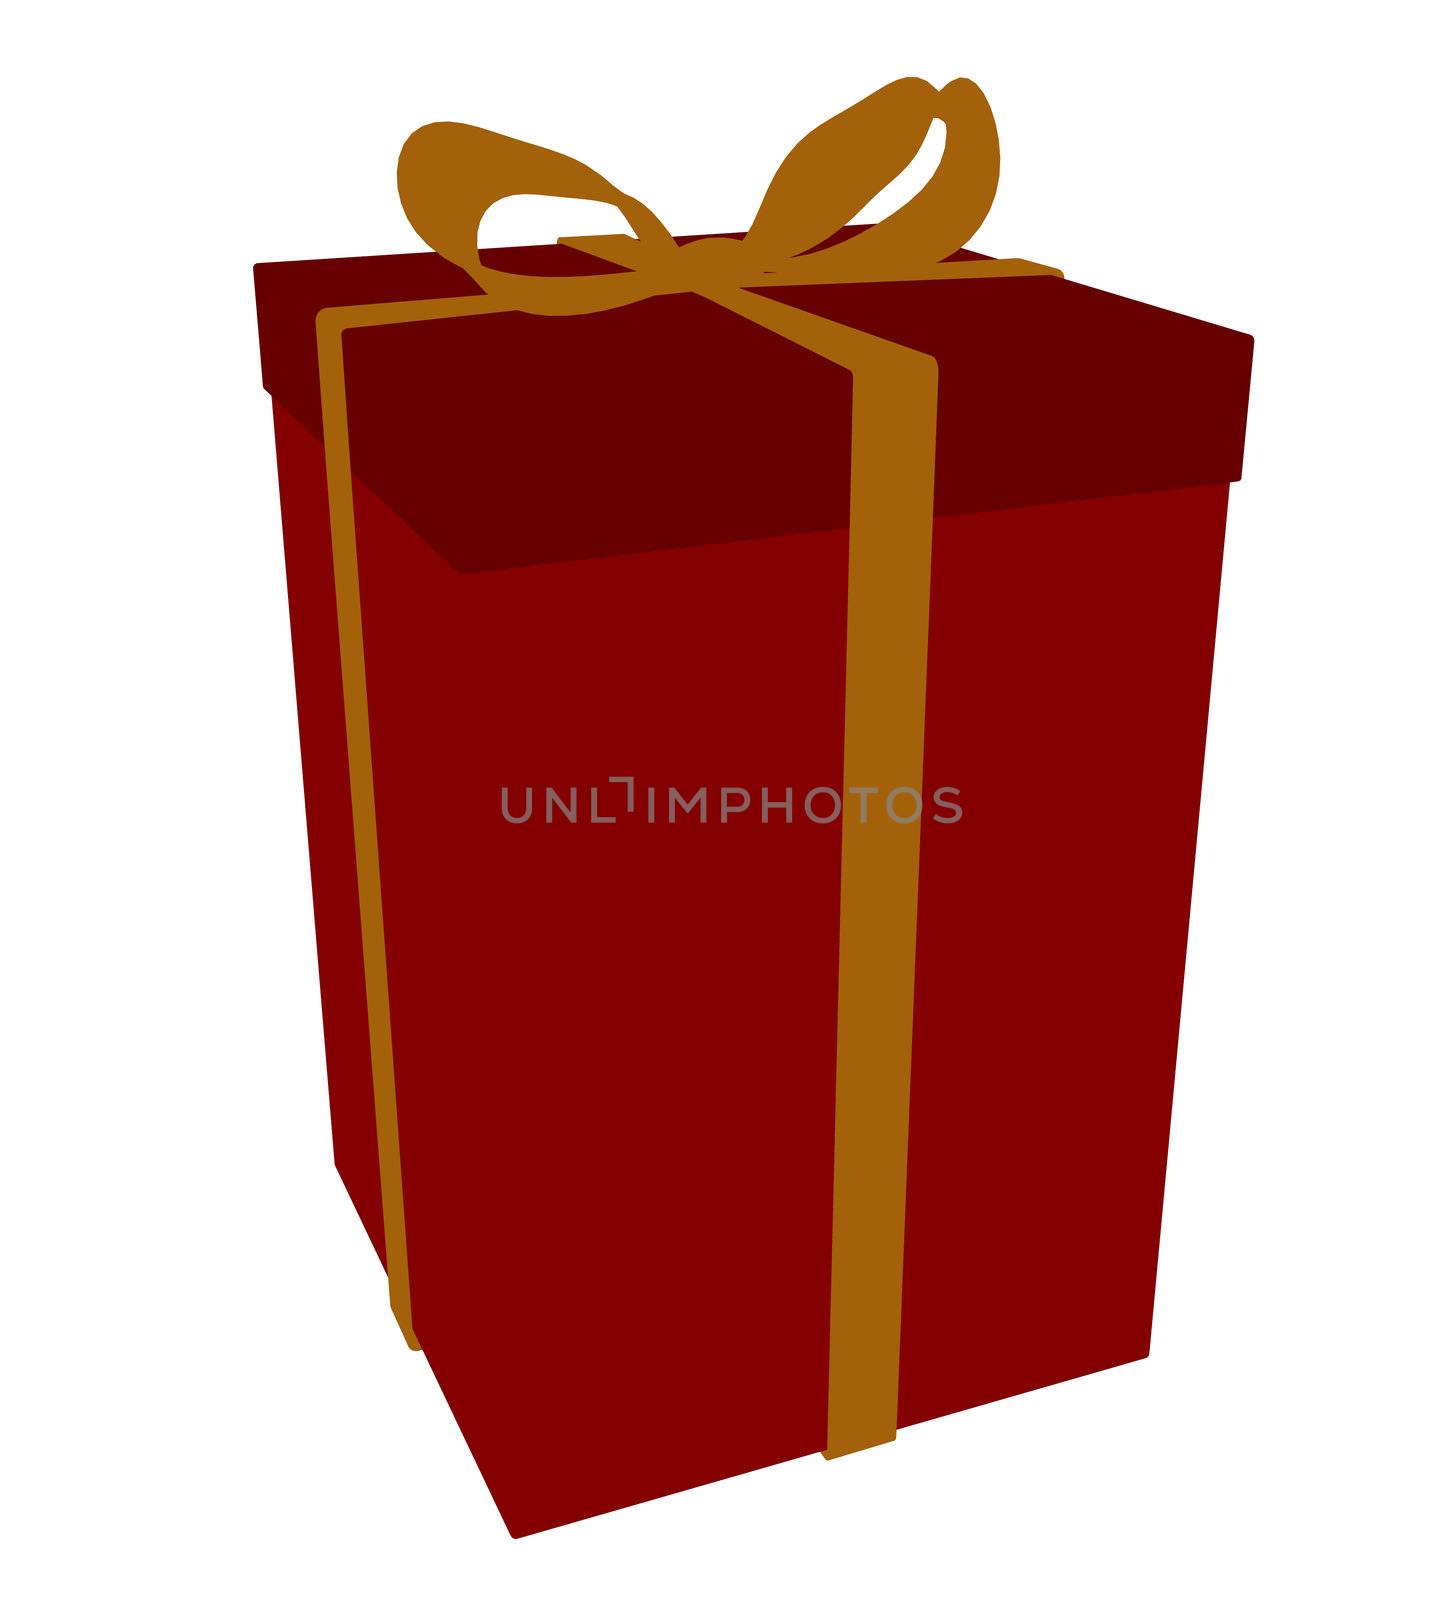 Gift box on a white background